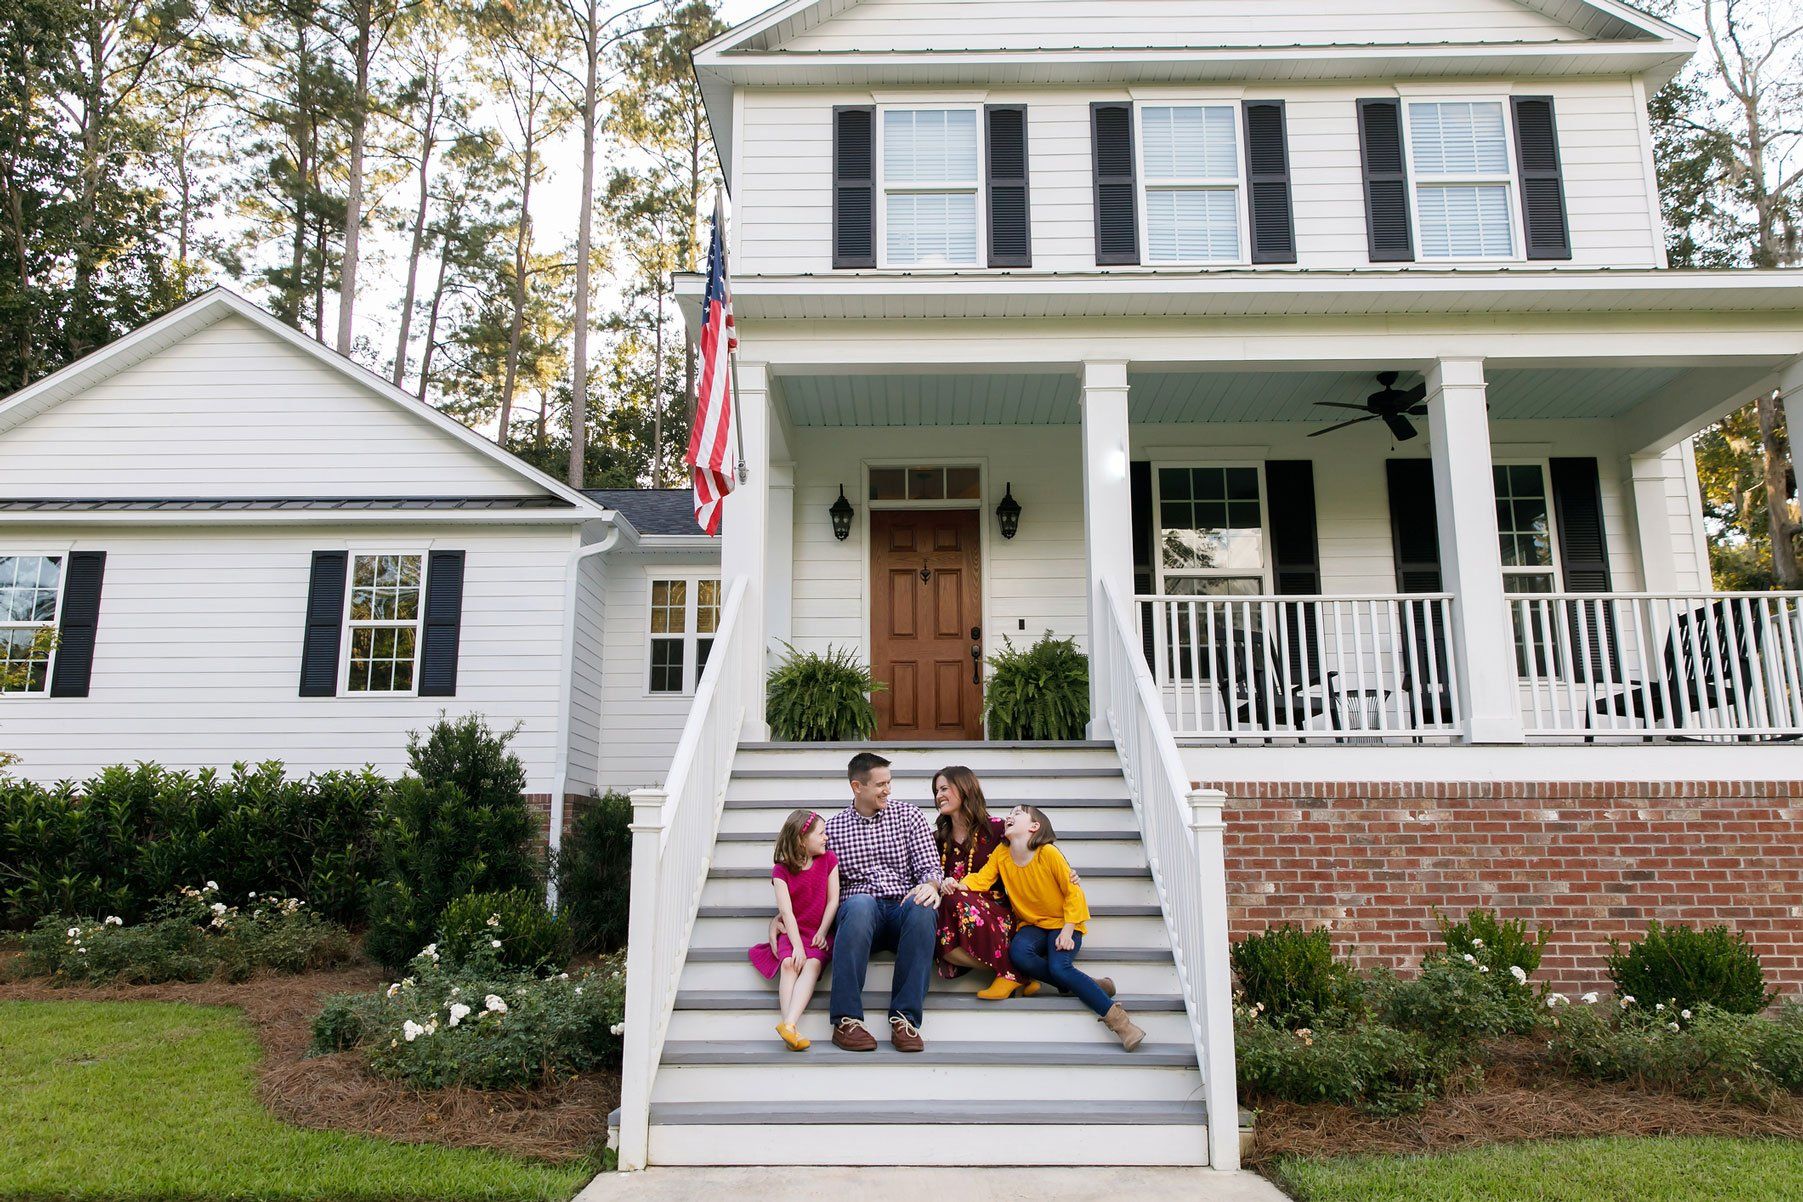 Elegant Residential House with Family Outside — Richmond, VA — Keil Plumbing & Heating, Inc.